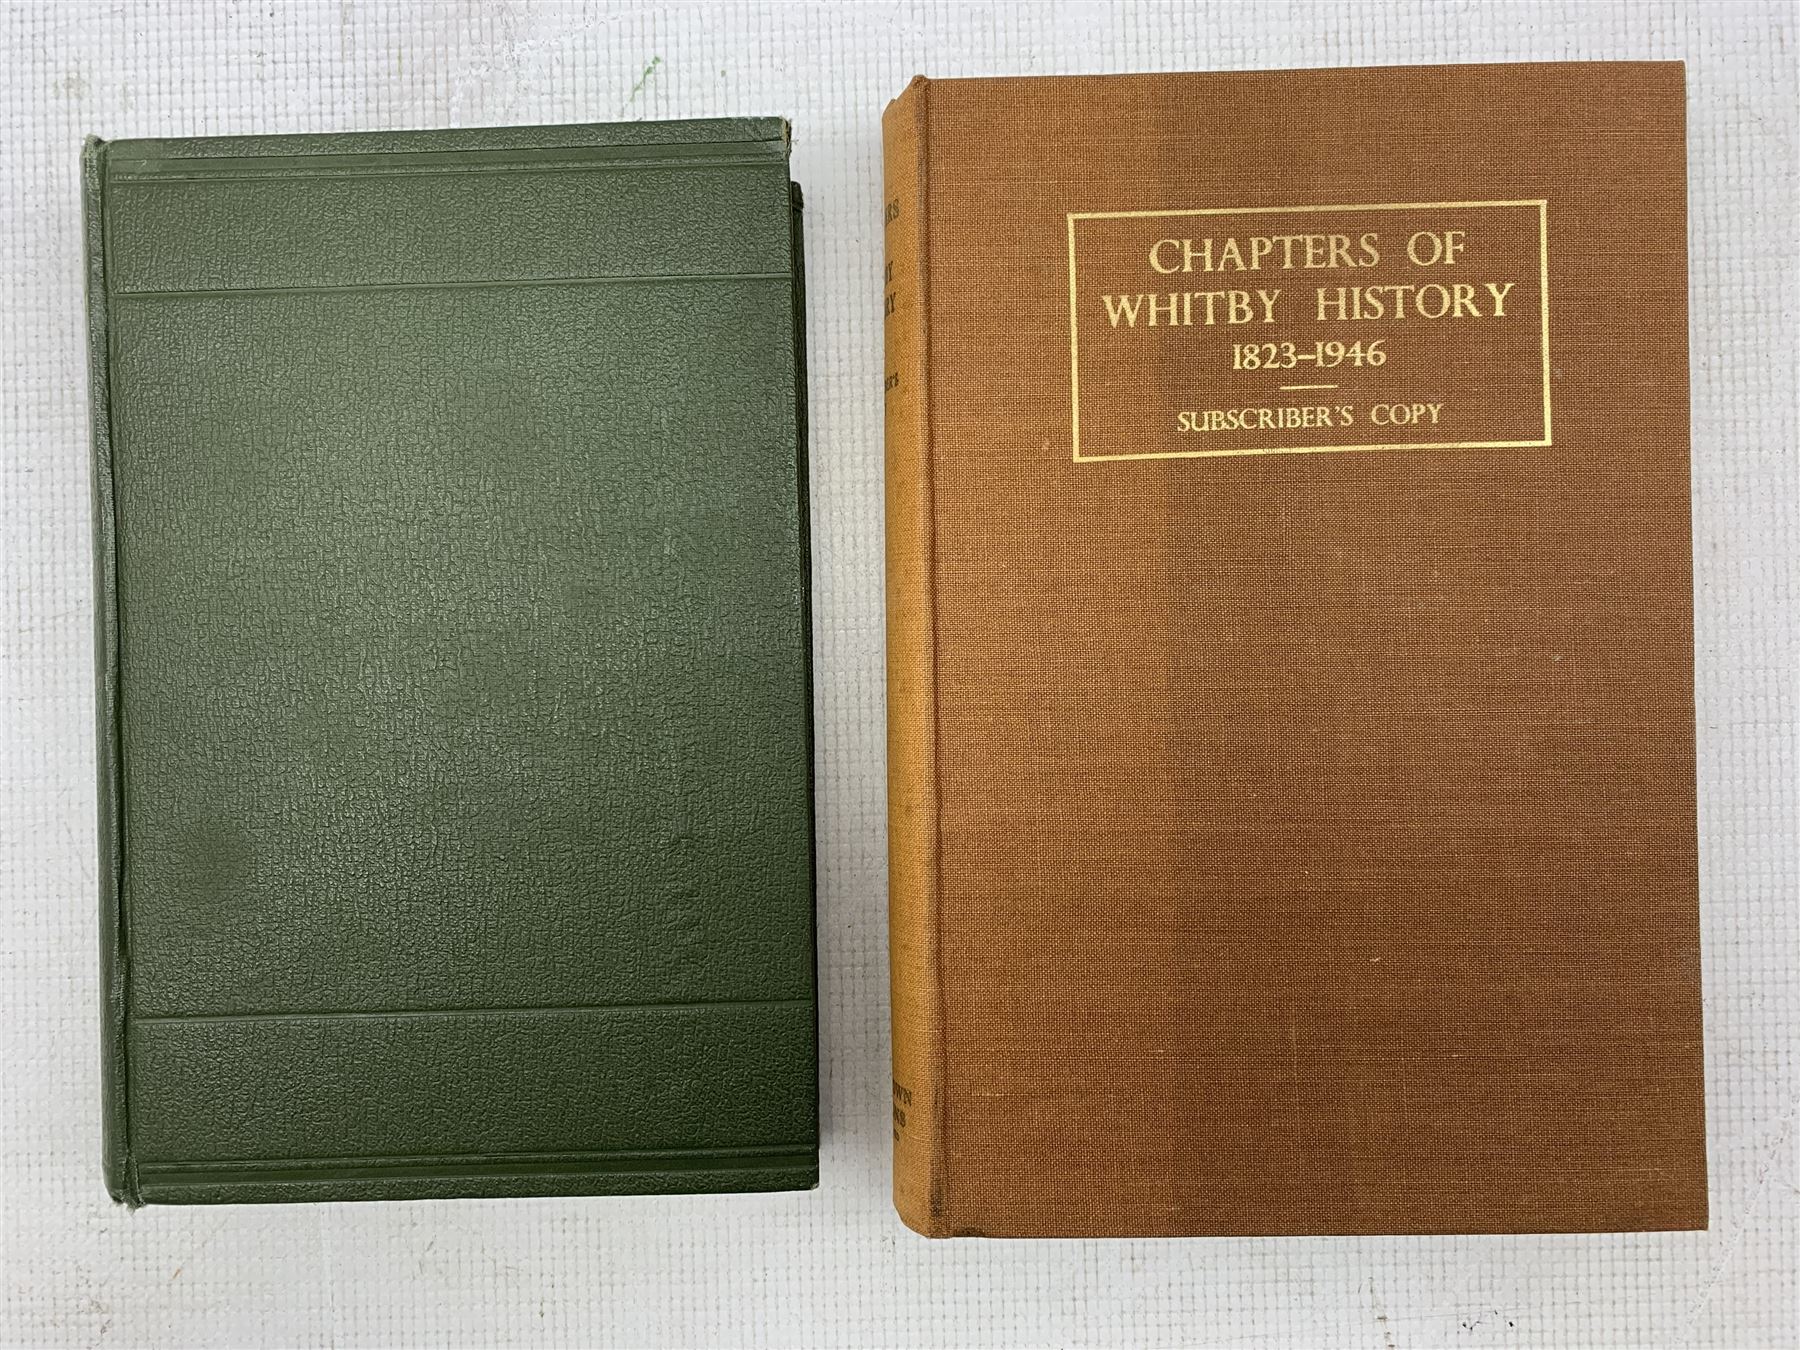 H.B.Browne - Chapters of Whitby History 1823-1946 - Image 2 of 2